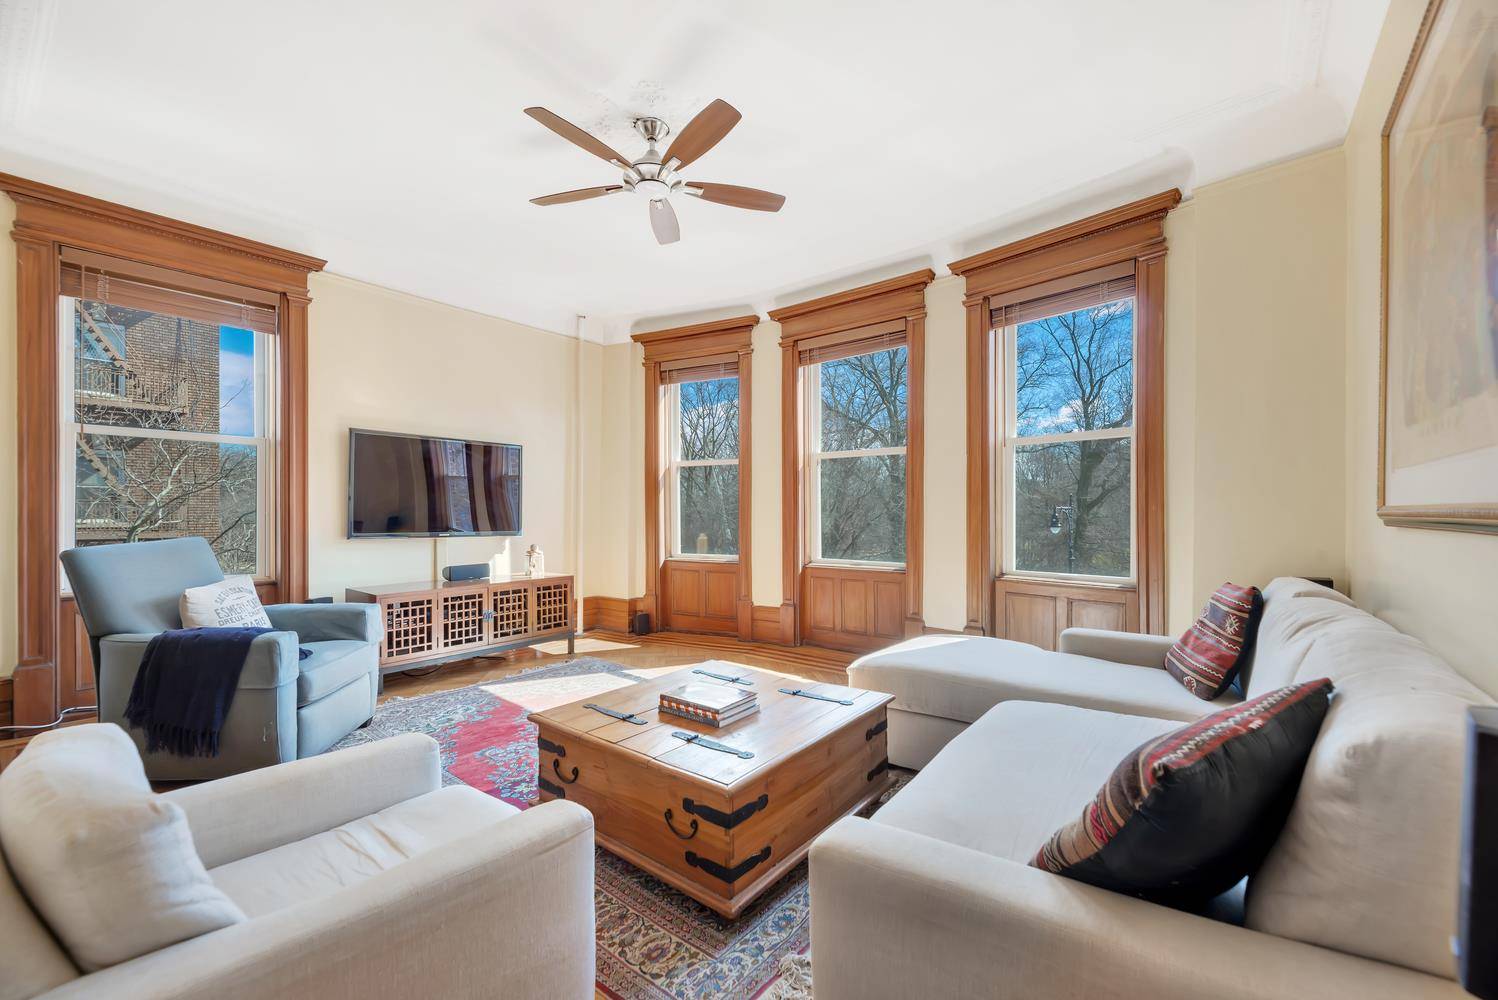 86 Prospect Park West, 3R is a stunning Central Slope corner apartment on one of the most prized blocks of Prospect Park West.